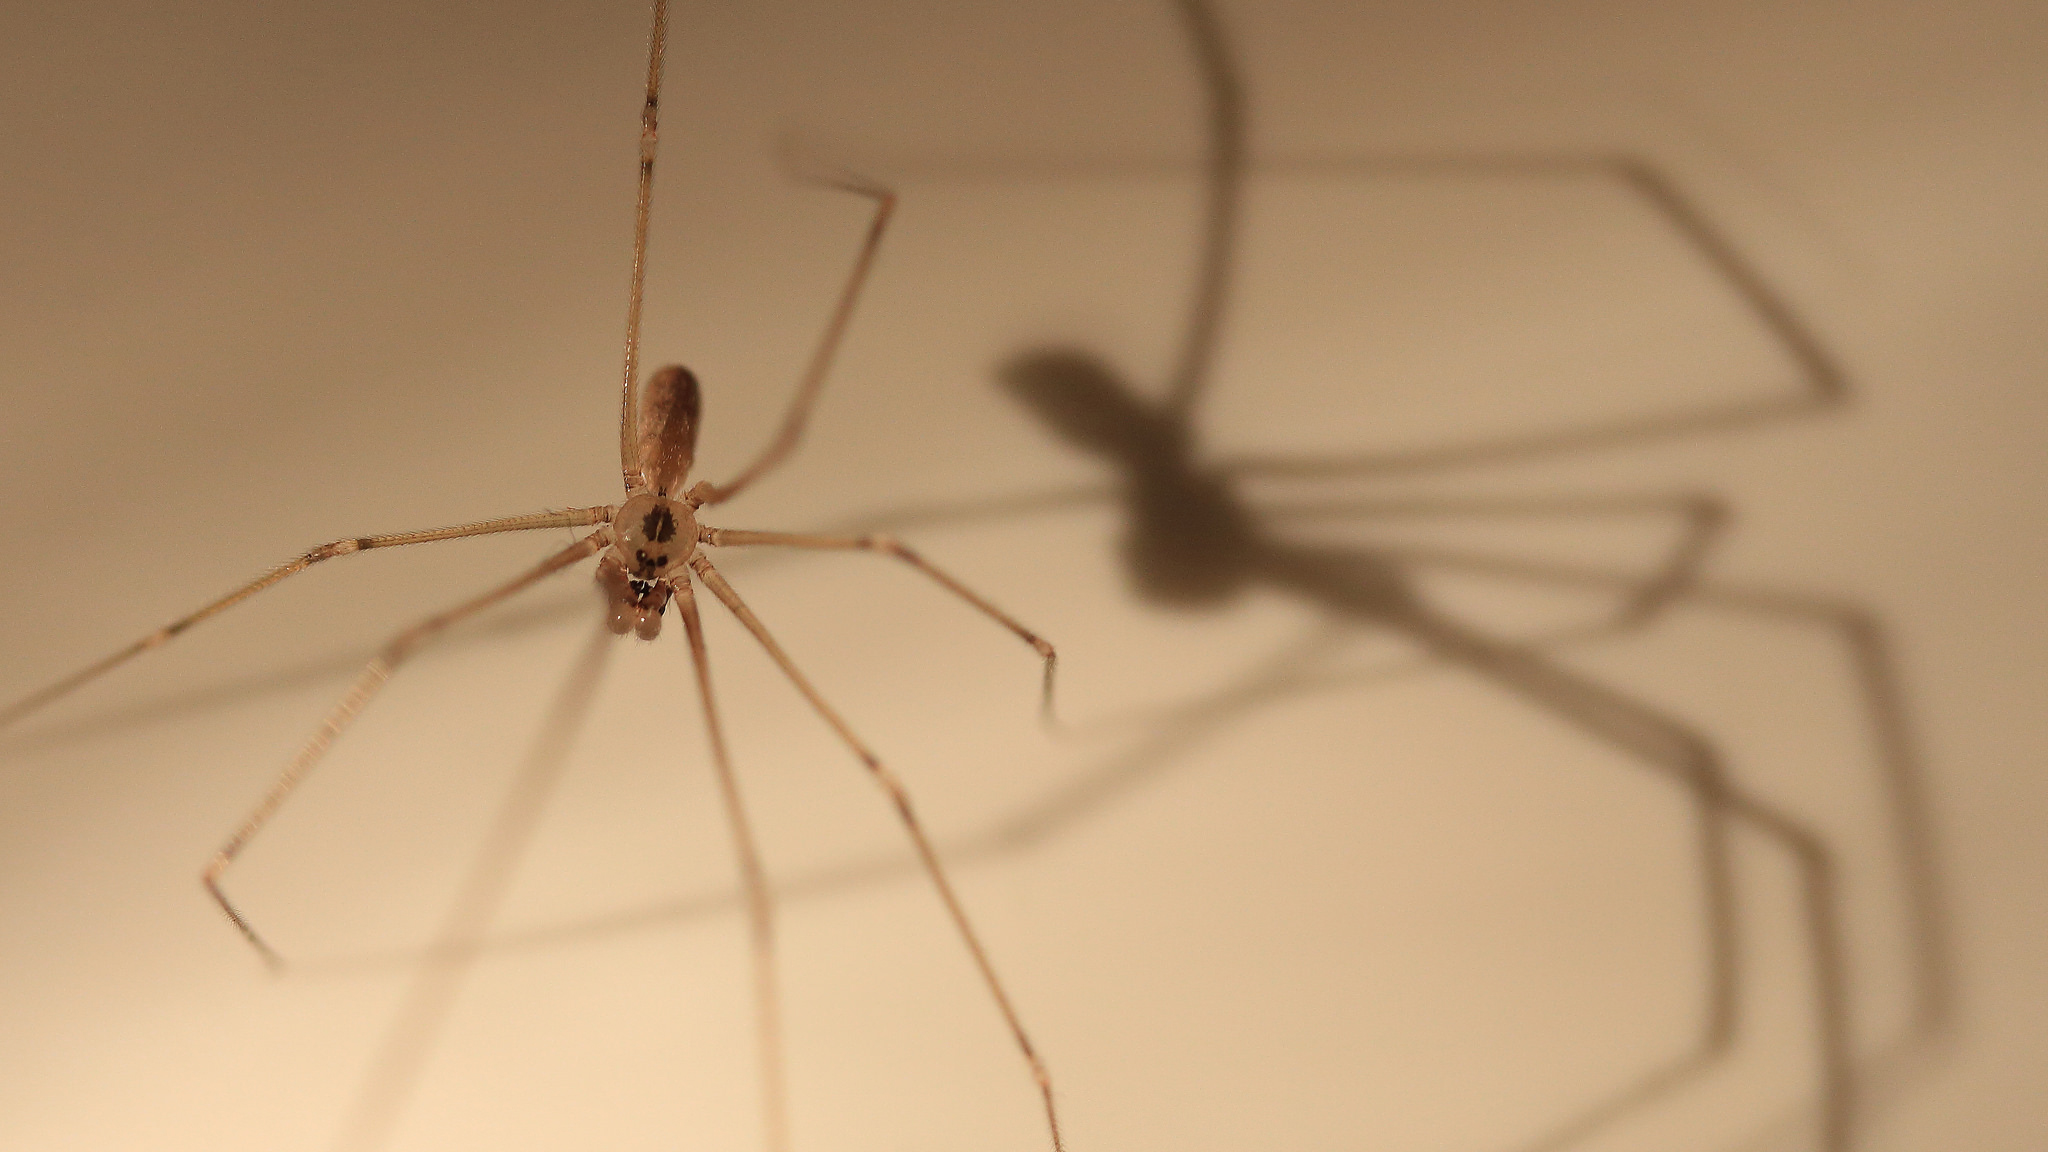 Daddy Longlegs Spider. Pholcidae, commonly known as cellar or vibrating spiders. Photo © alvaroreguly / Flickr through a Creative Commons license